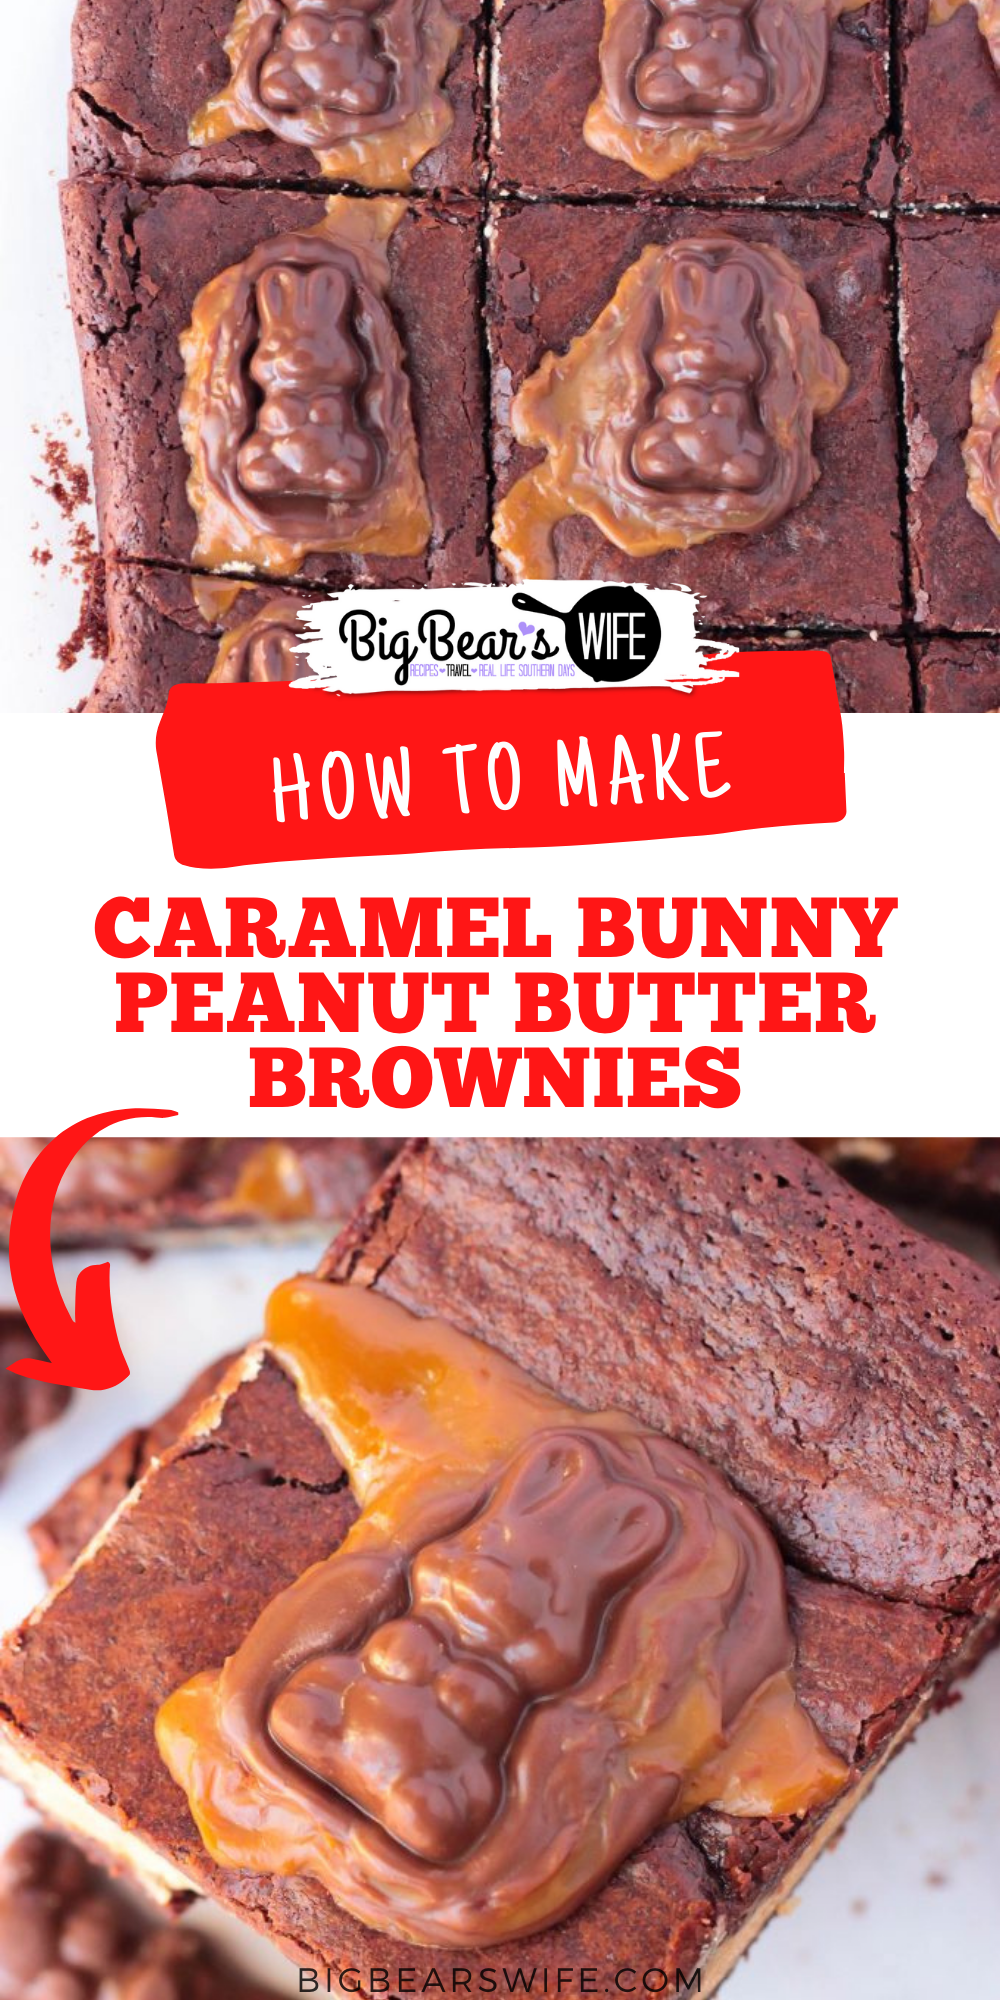 Peanut Butter Stuffed Chocolate Brownies with a chocolate caramel bunny melted on top, what’s not to love? These Caramel Bunny Peanut Butter Brownies are the perfect addition to any Easter dessert spread!

 via @bigbearswife